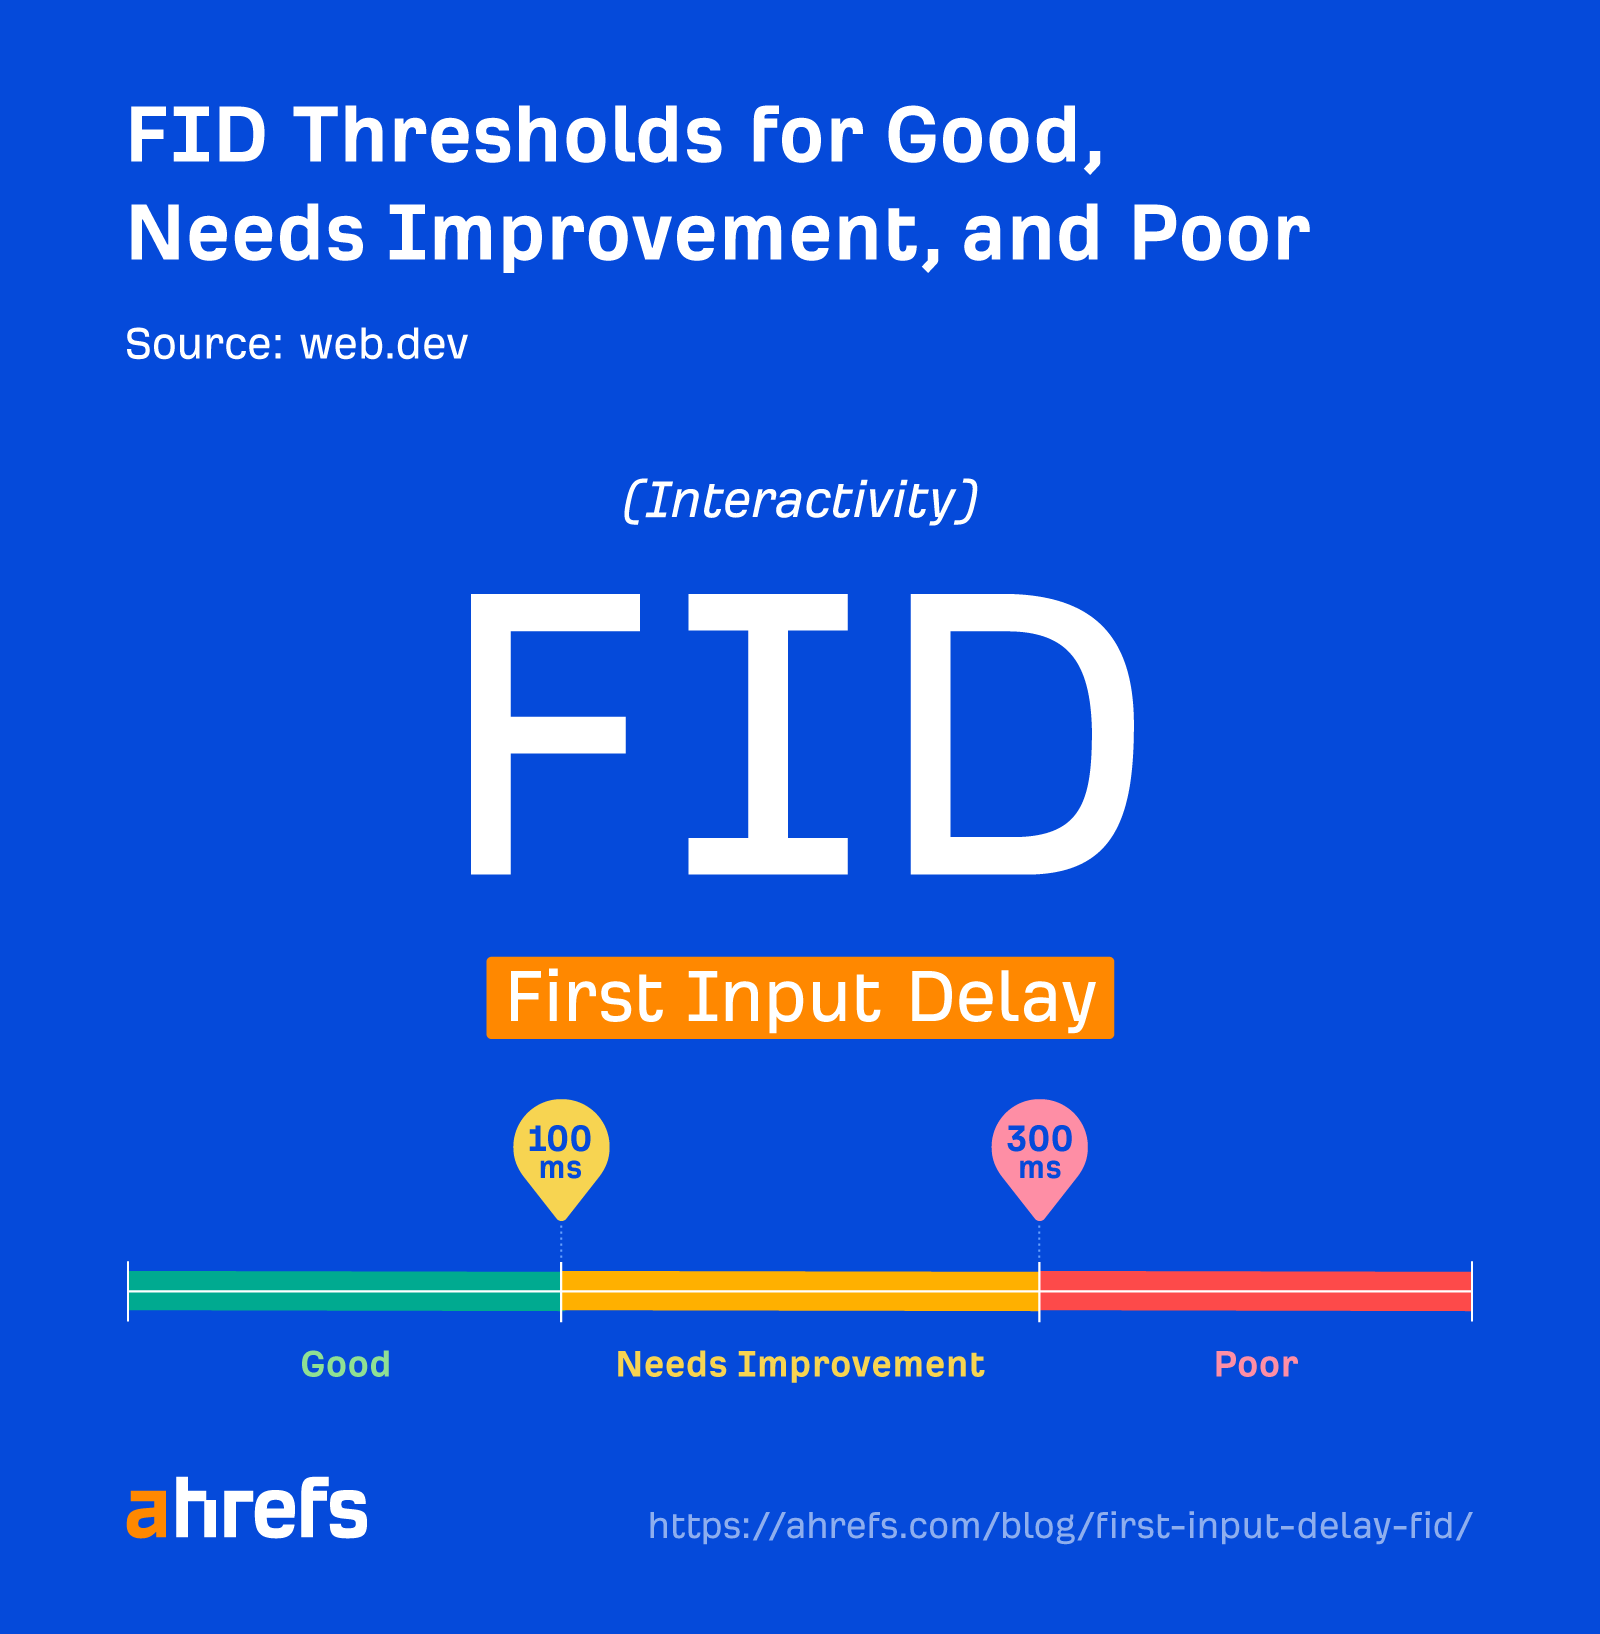 FID thresholds for good, needs improvement, and poor